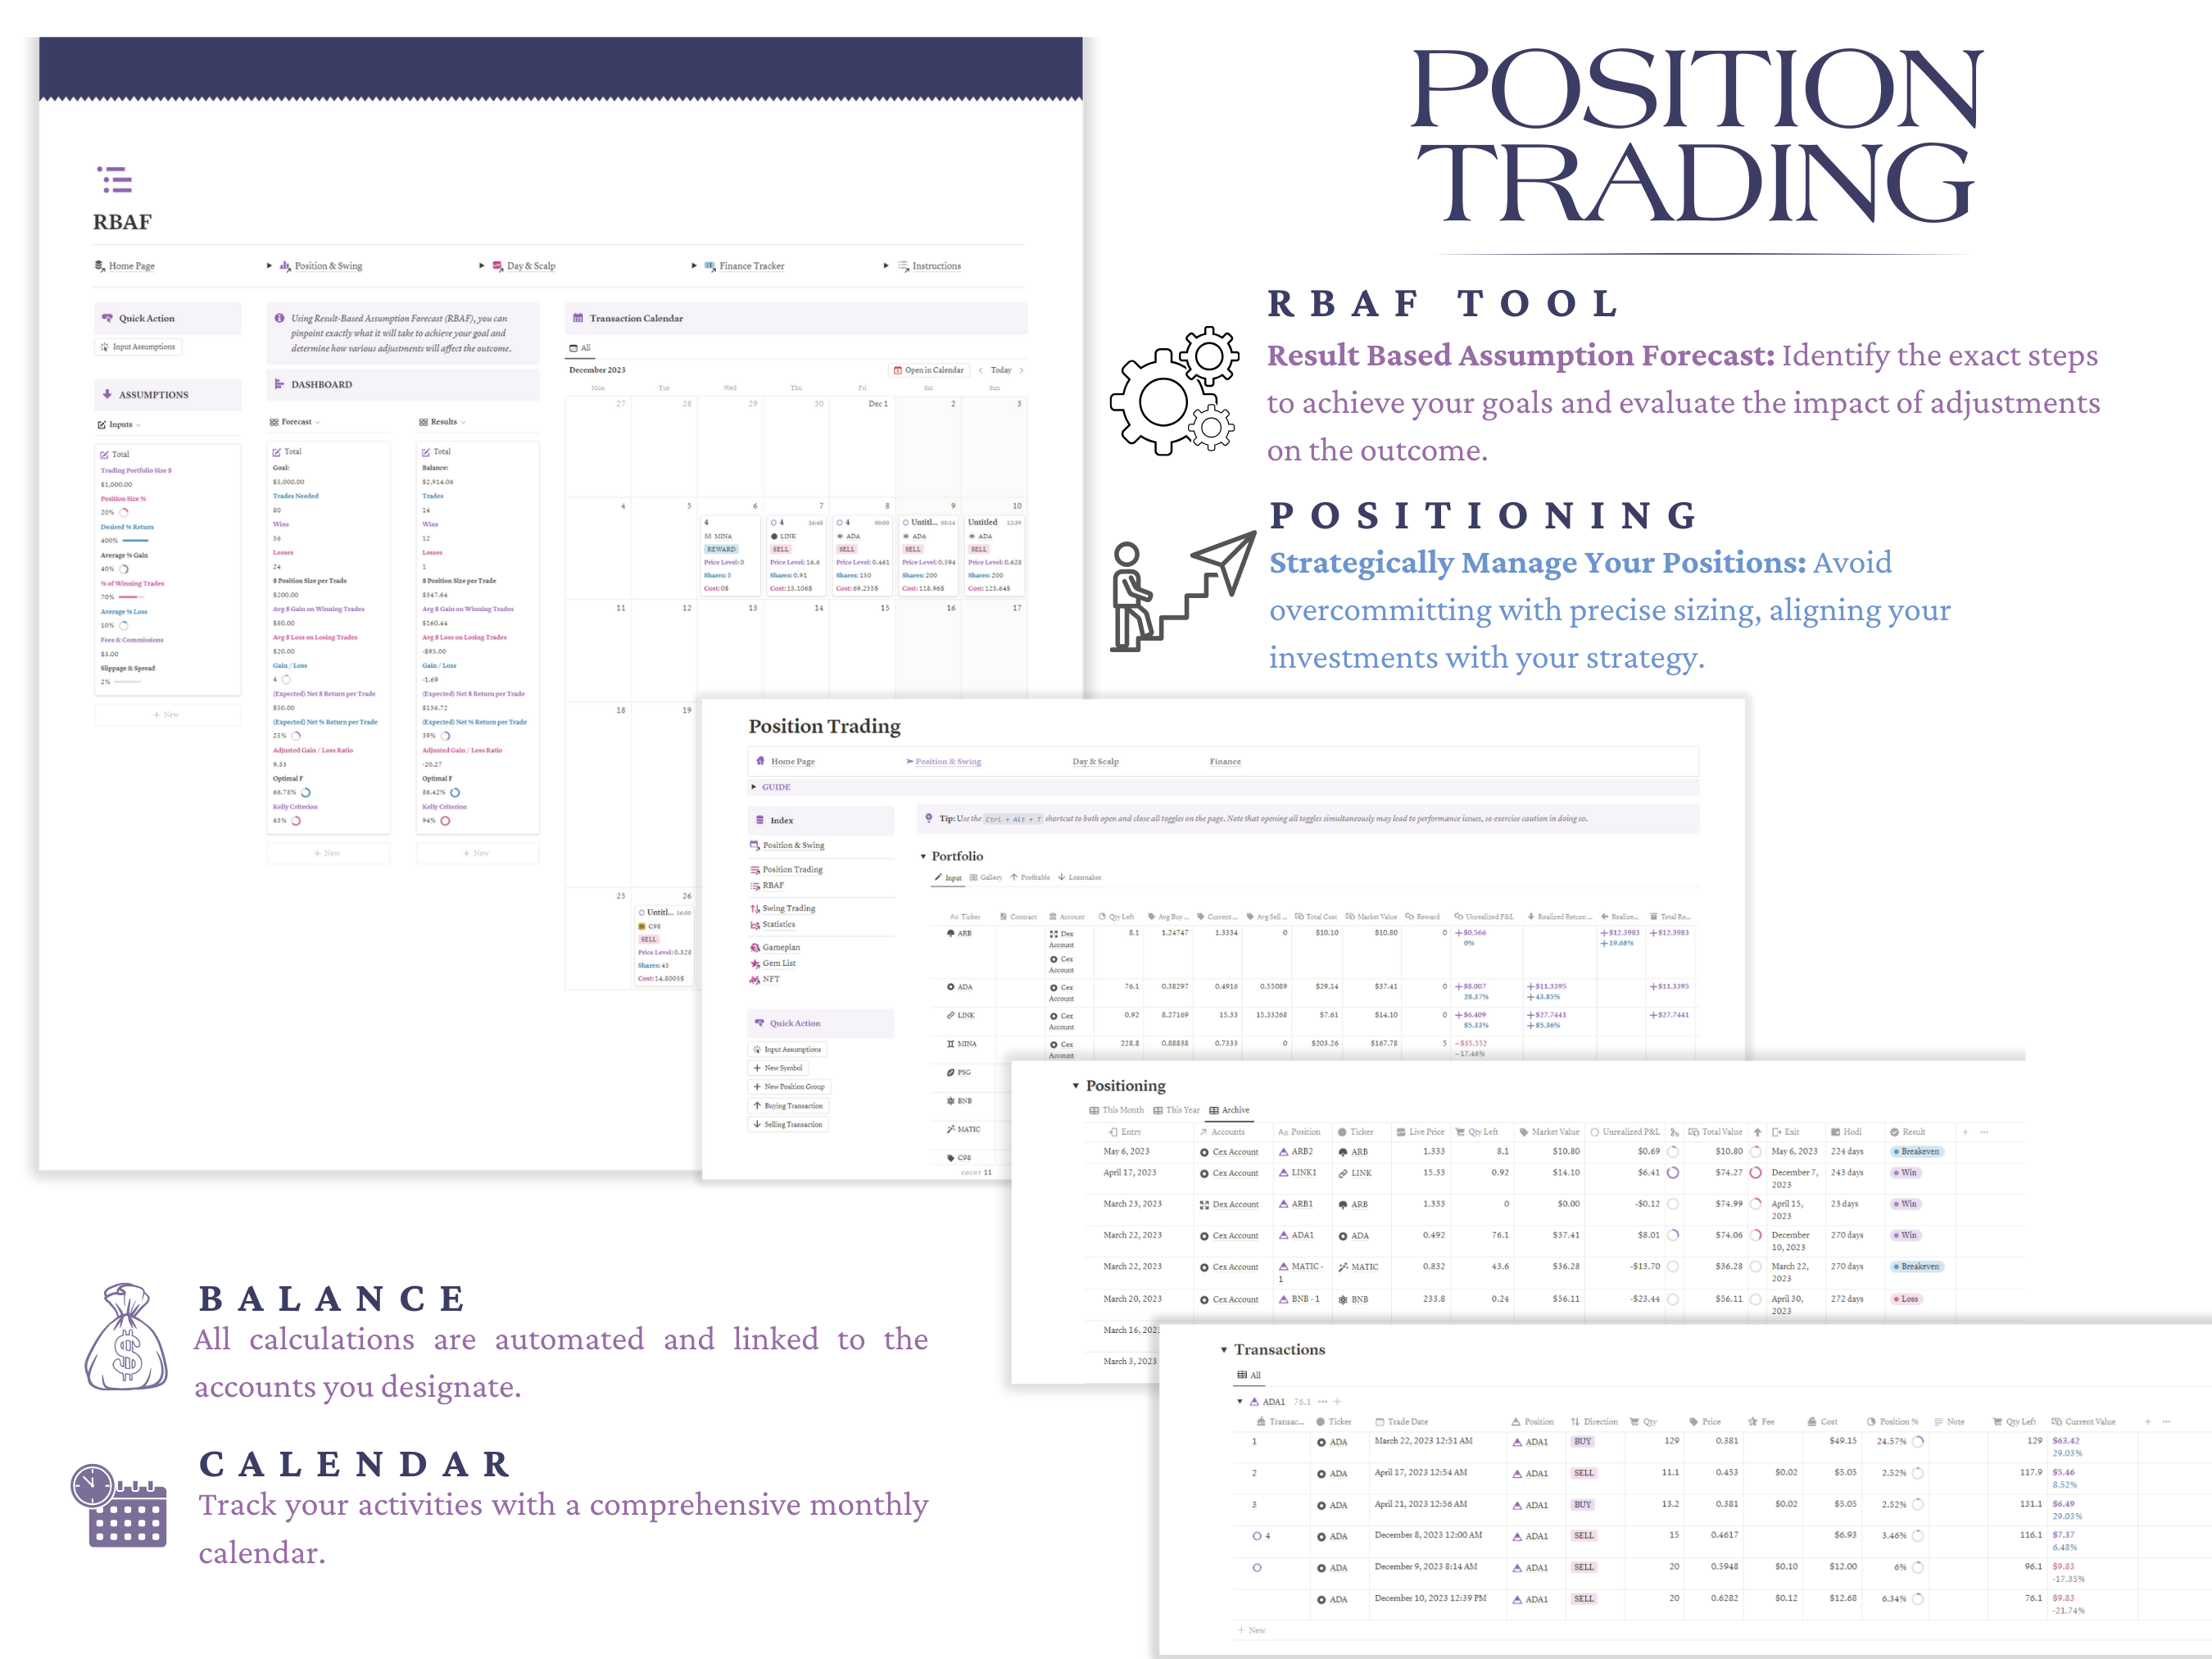 Elevate your trading with the Notion Portfolio Tracker & Notion Trading Journal! 
Track your portfolio, document trades, manage risk, and optimize your routine. Enjoy weekly, monthly, and yearly performance reviews, interactive dashboards, and real-time financial widgets. 